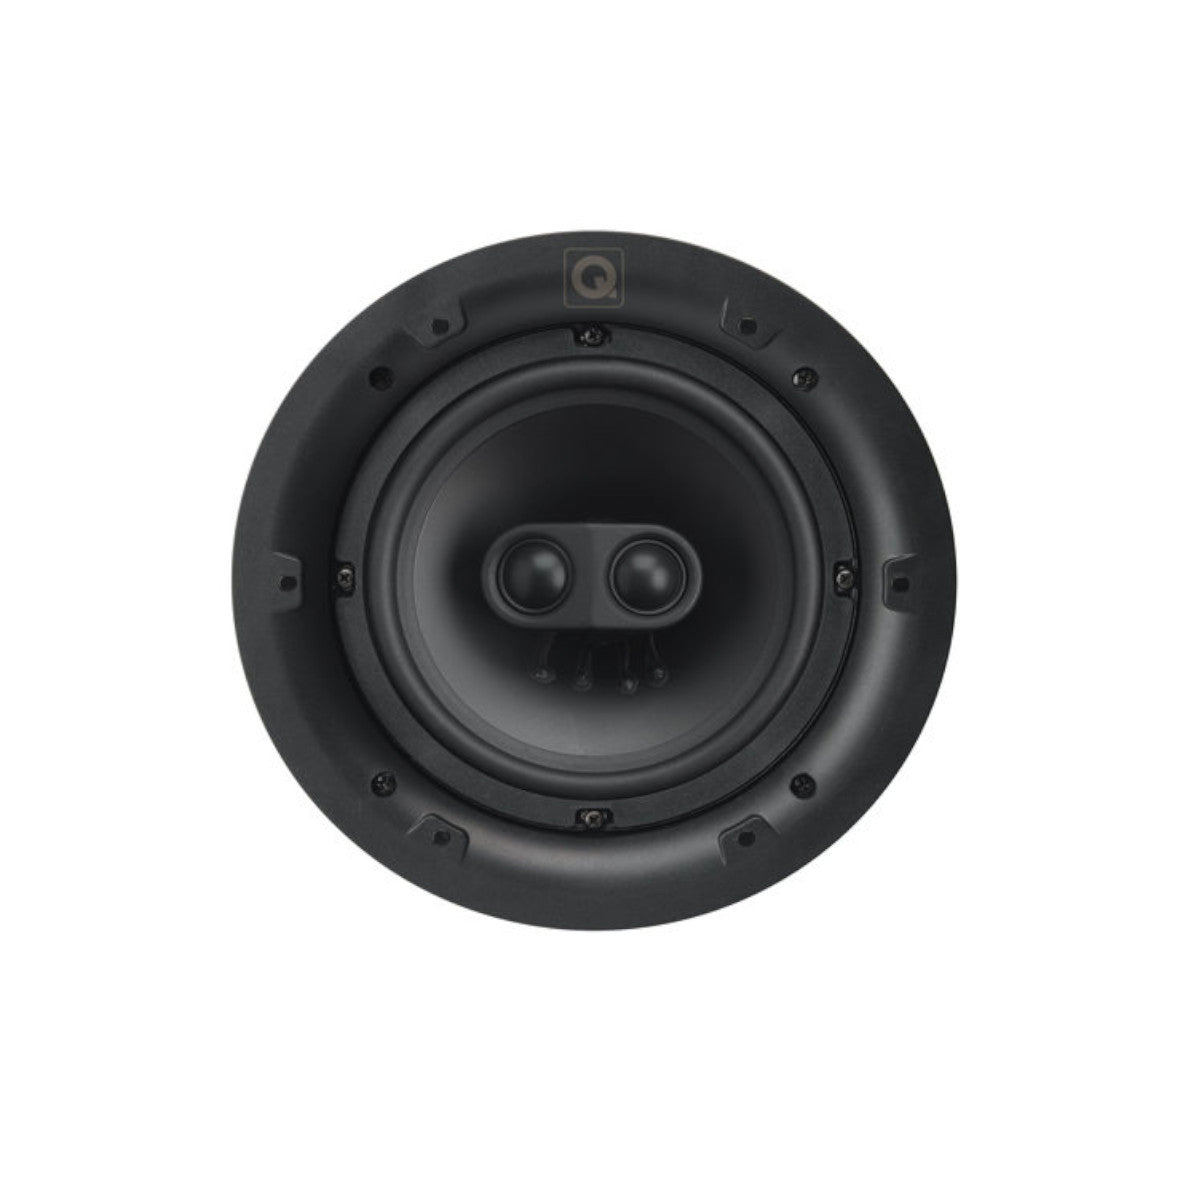 Q Acoustics Q Install QI 65C ST In-Ceiling Stereo Speaker (Each) - Ooberpad India